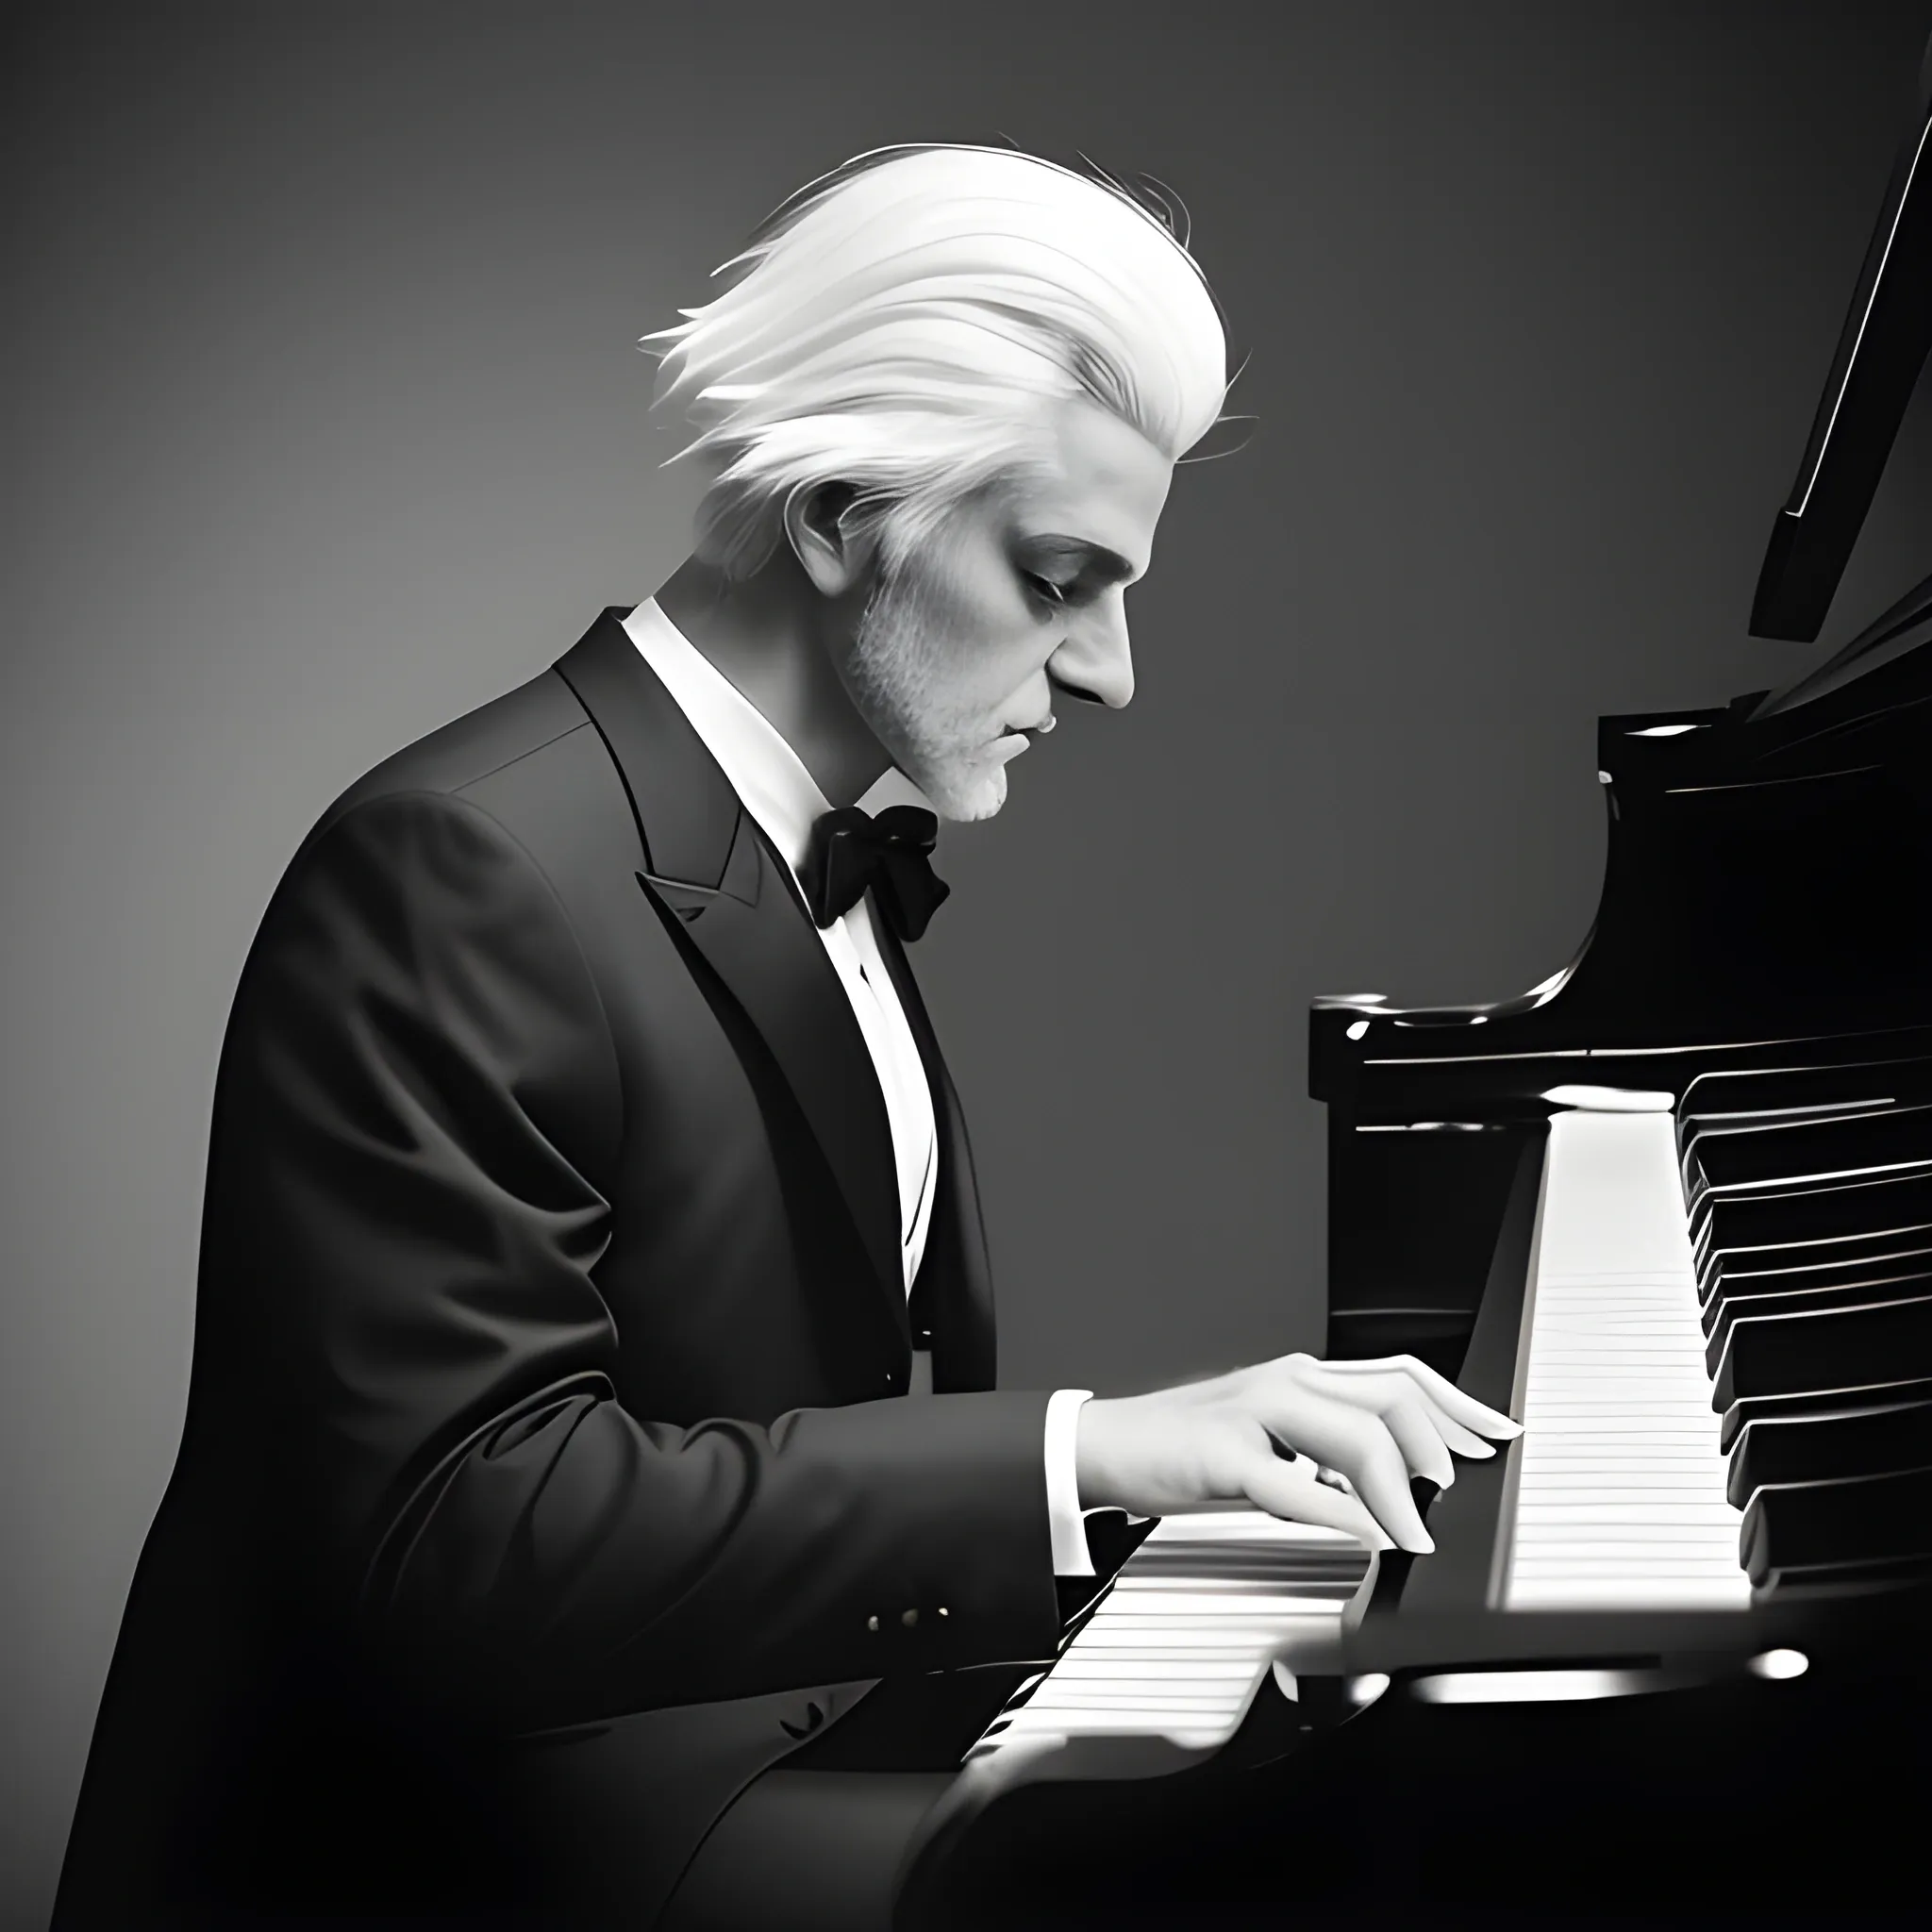 black and white colors, black and white palette, person with white hair and gray suit playing the piano, lateral point of view, scenary backround, not much light, poor light, photographic style